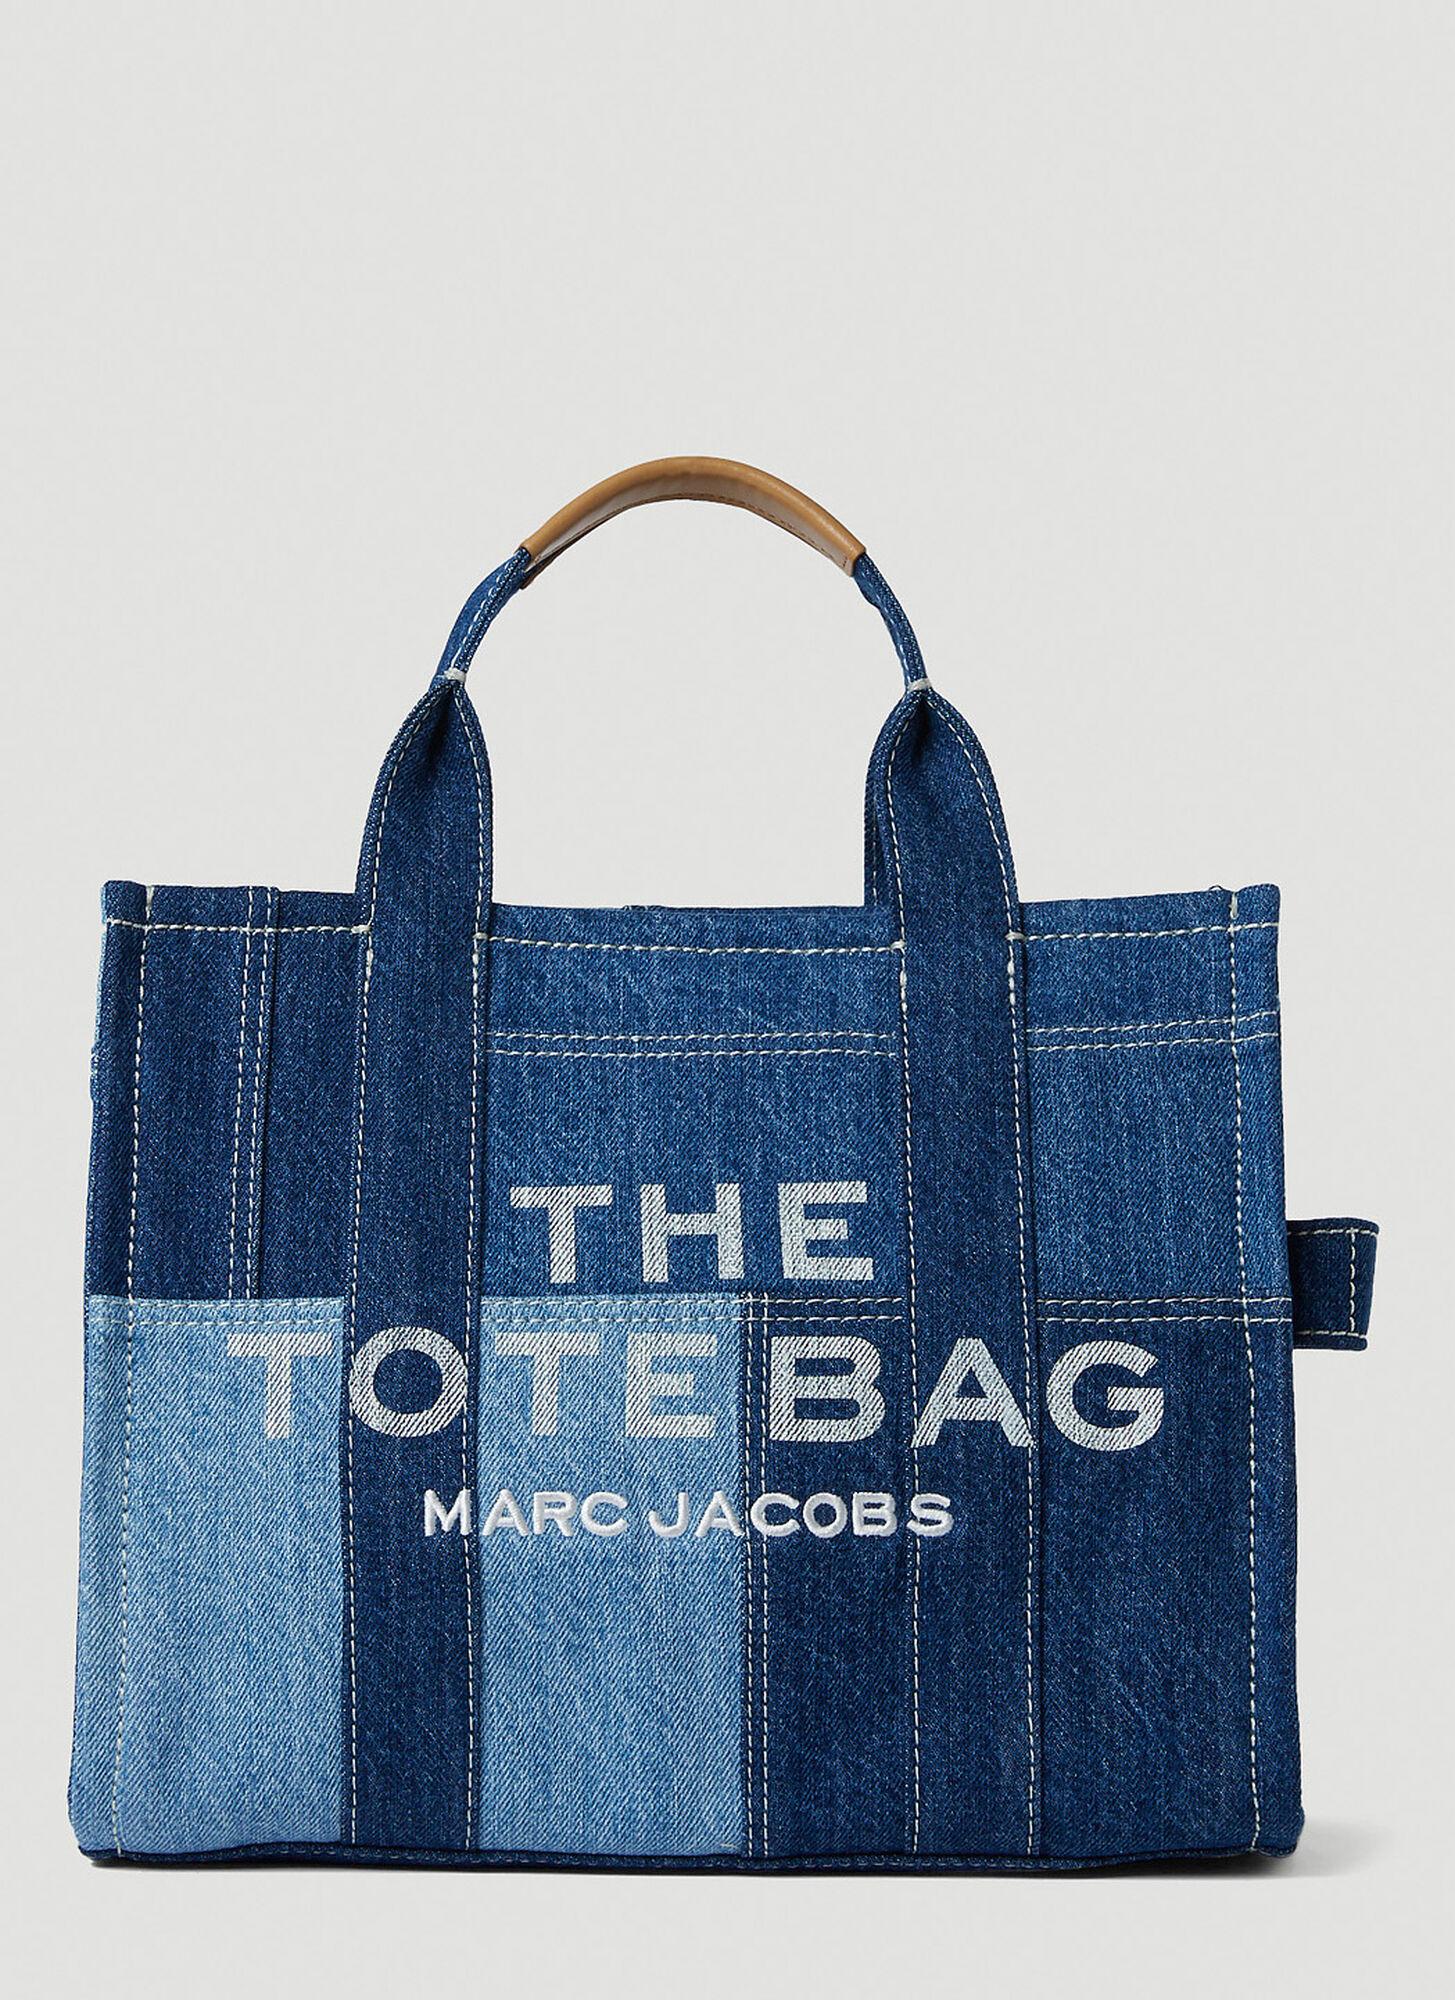 Marc Jacobs Denim Small Tote Bag in Blue | Lyst